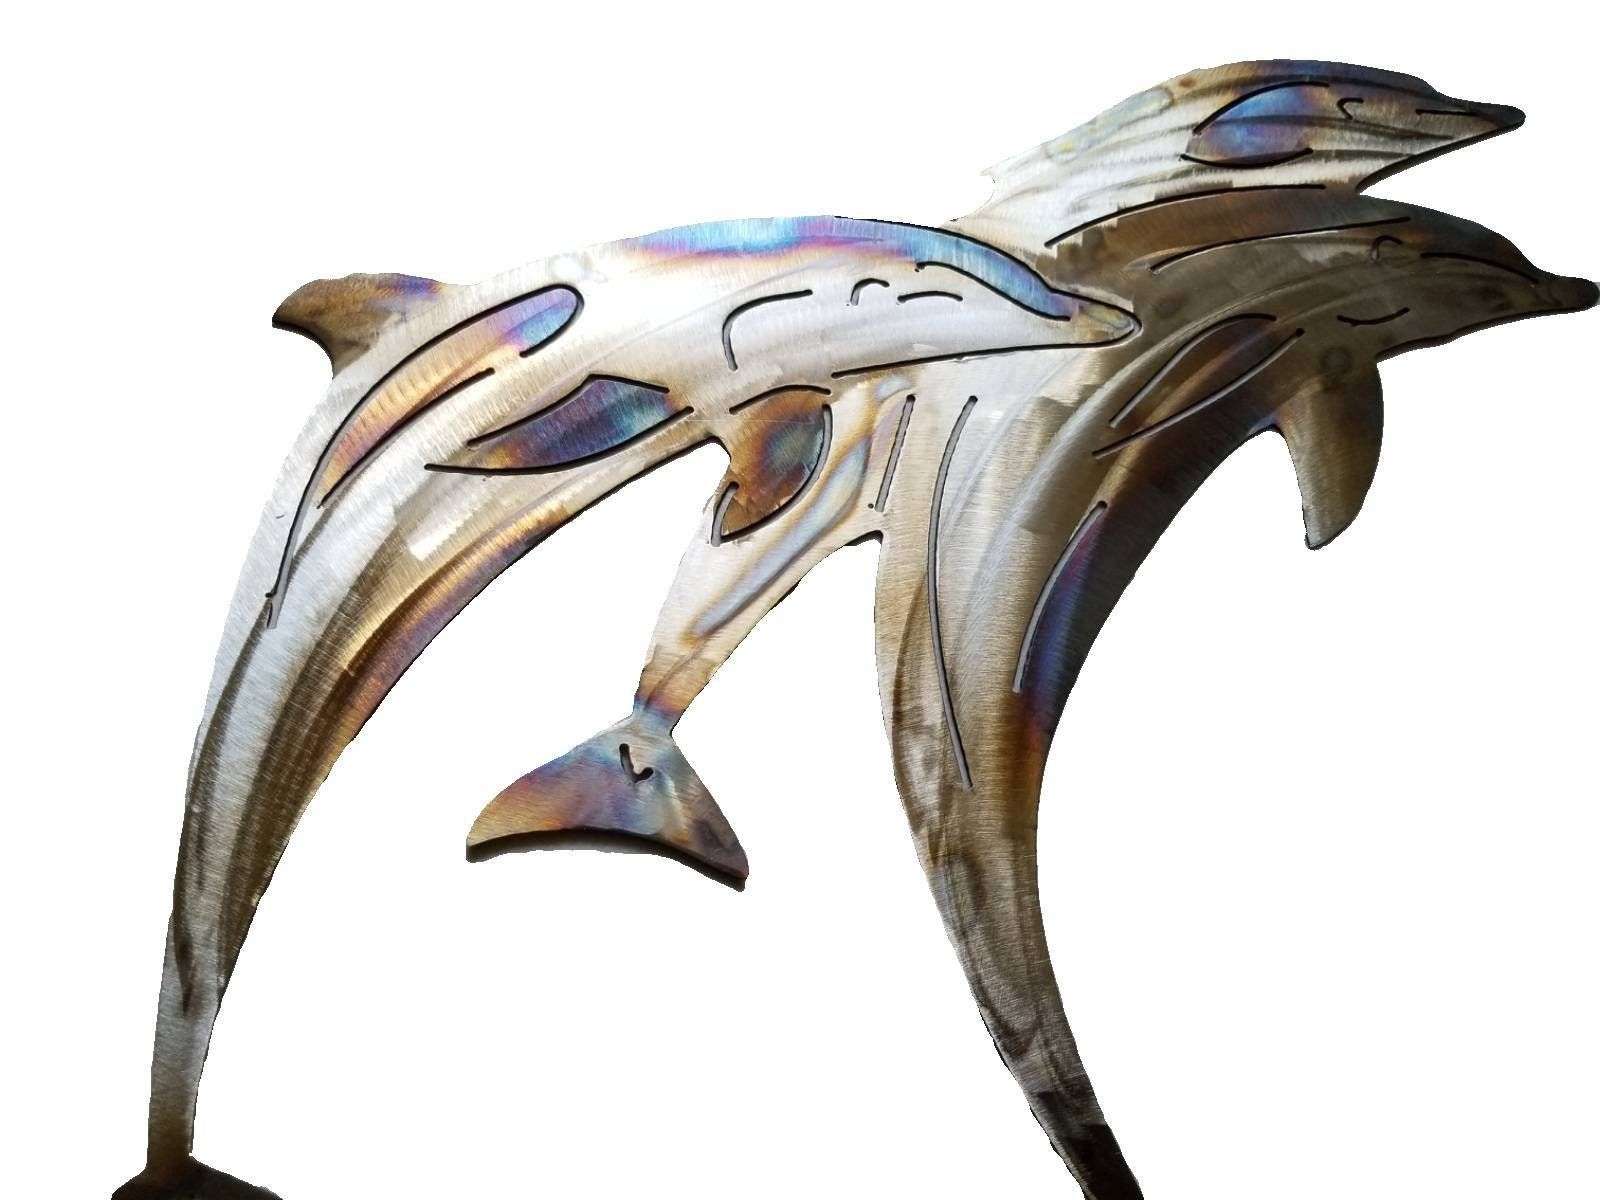 Stainless Steel Dolphin Metal Wall Art, Pod Of Dolphins, Beach House Regarding Most Recently Released Stainless Steel Metal Wall Sculptures (View 3 of 20)